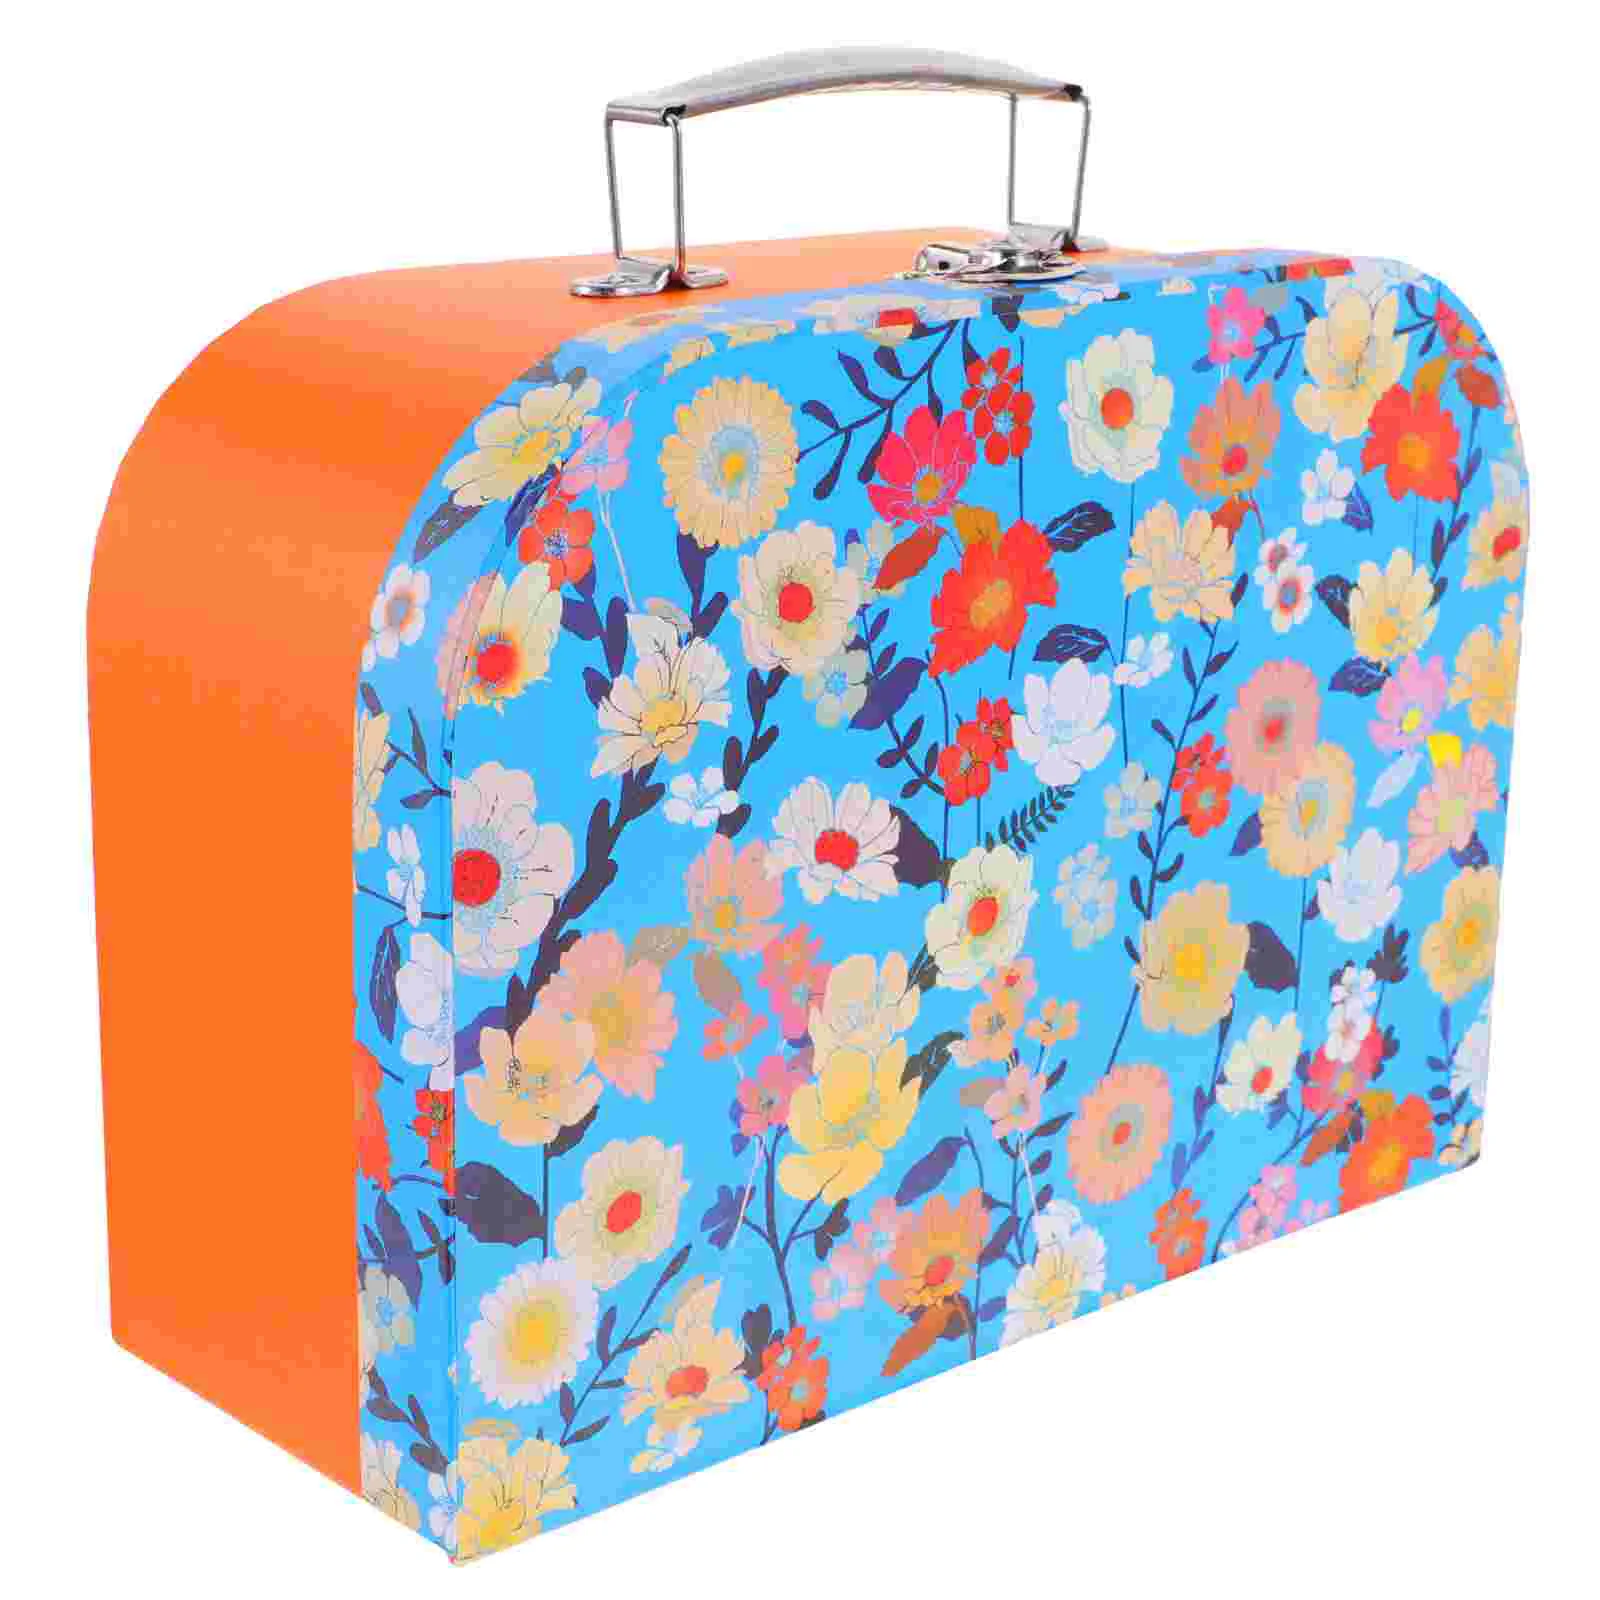 

Storage Suitcase Mini Suitcases Party Favors Wedding Memory Box Gift Jewelry Boxes Lids Cardboard Paperboard Travel Toys Kids